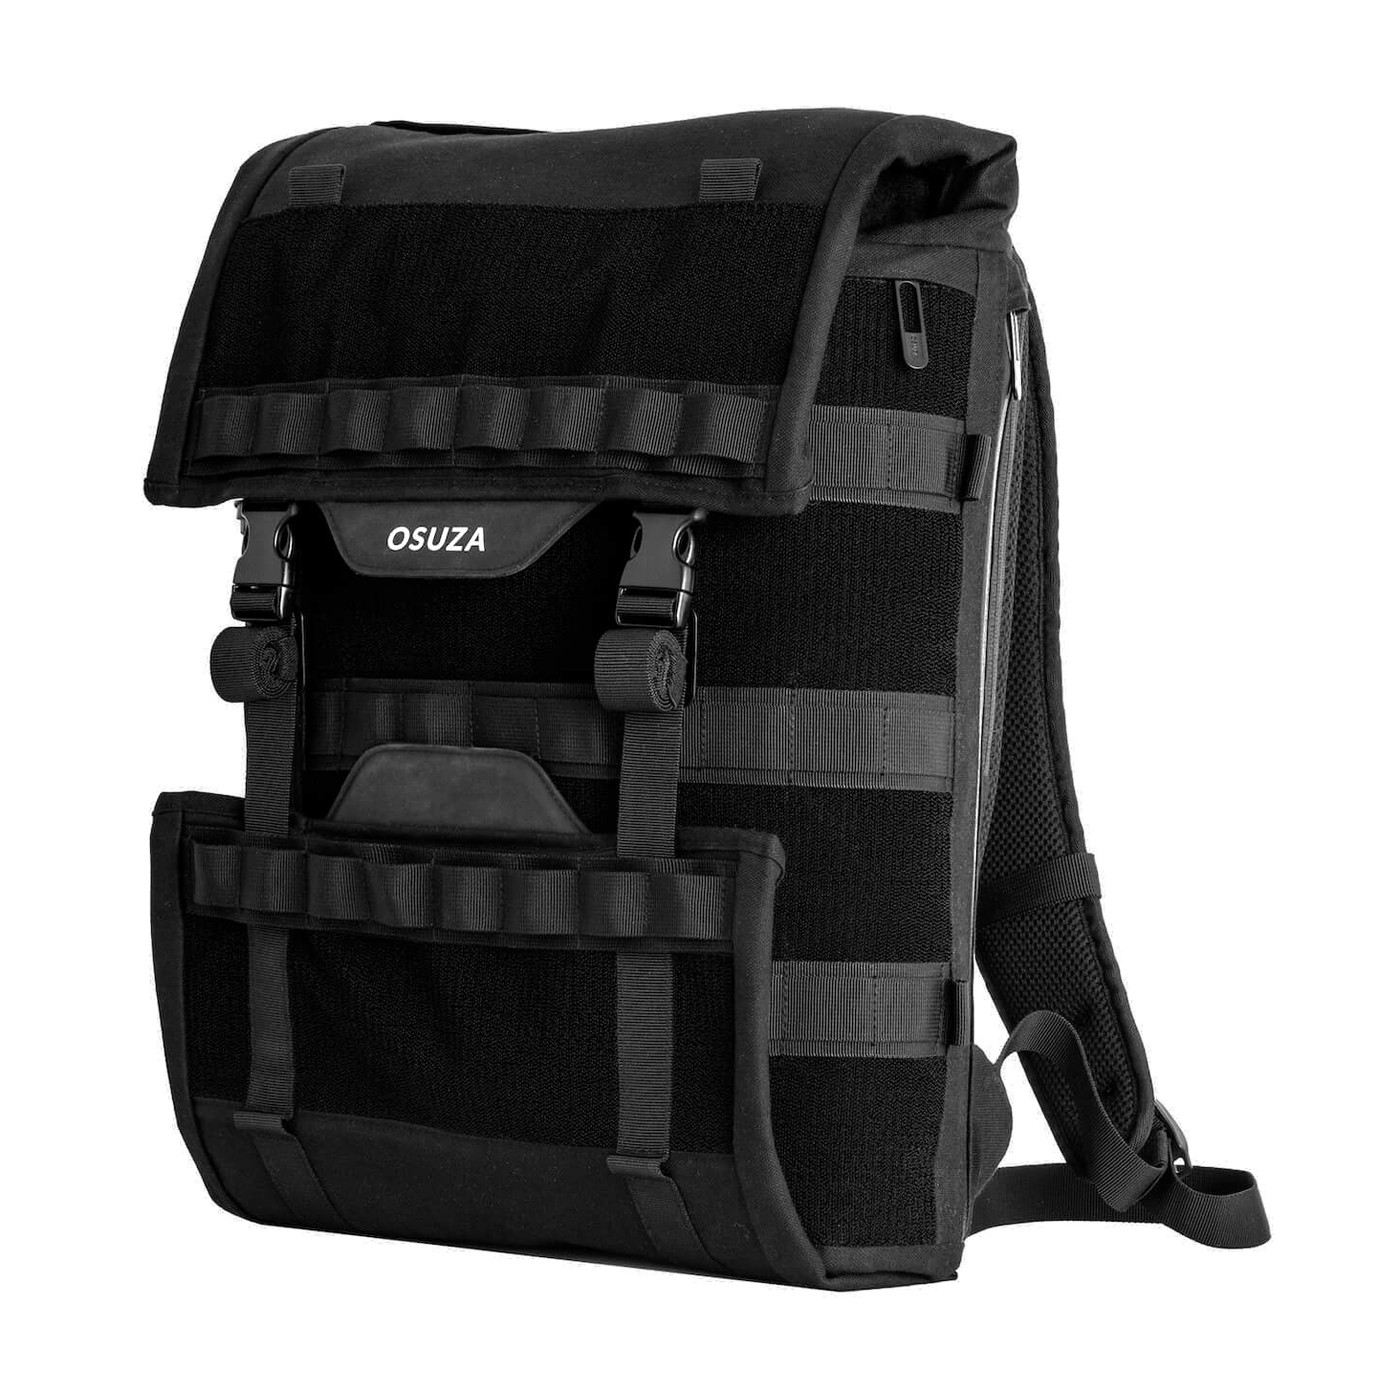 Black technical canvas backpack